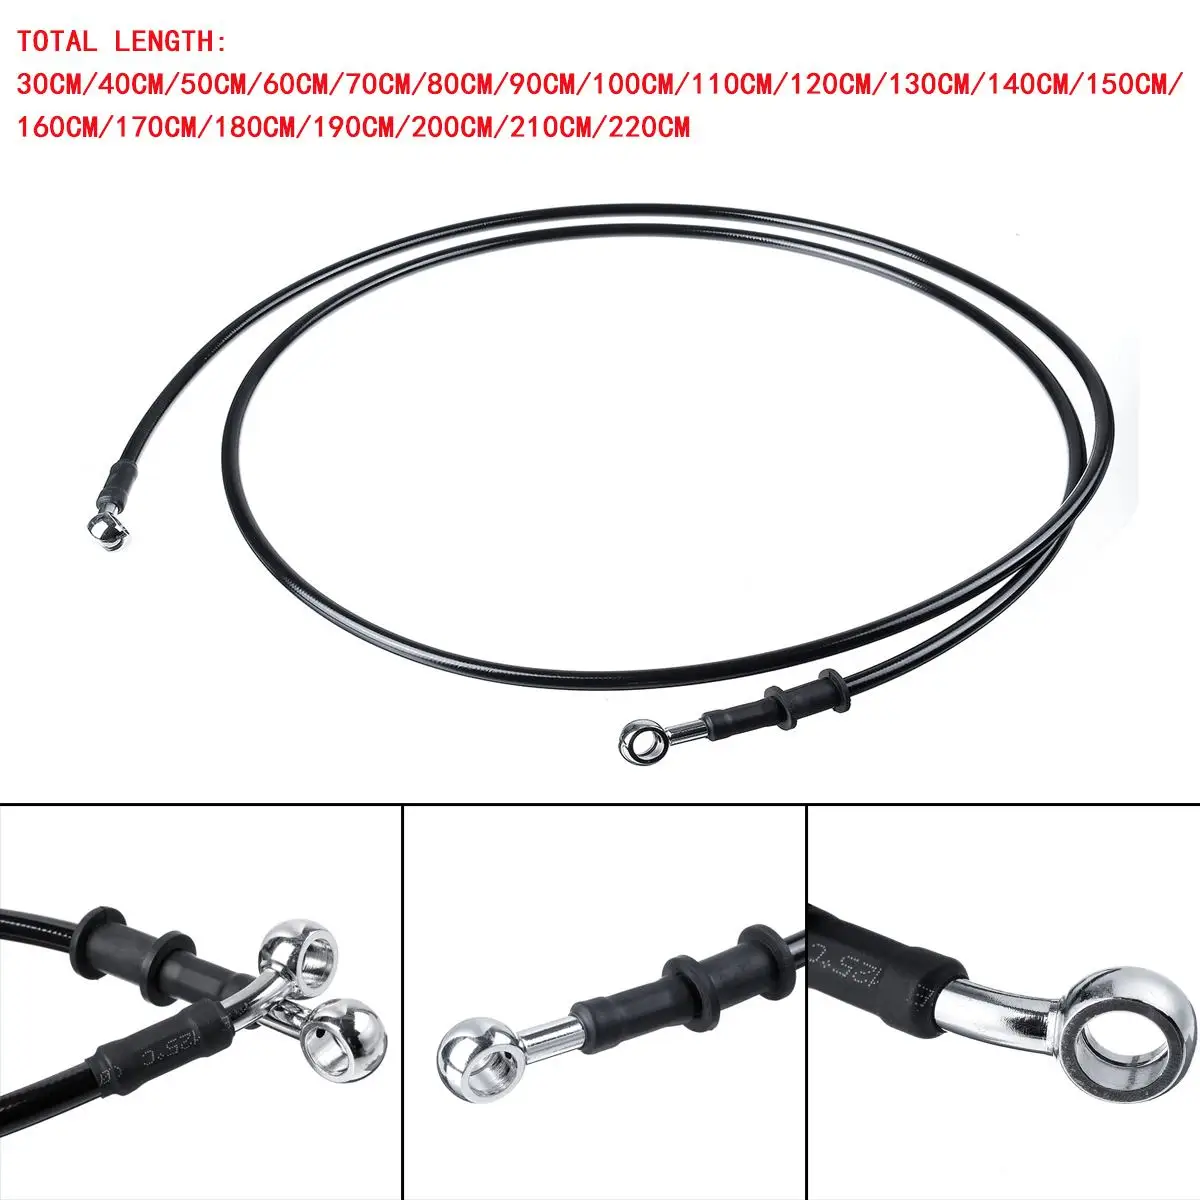 30cm-110cm Universal Motorcycle Braided Brake Clutch Oil Hose Line Pipe Tube Brake Tubing Fit For Yamaha For Suzuki For Harley